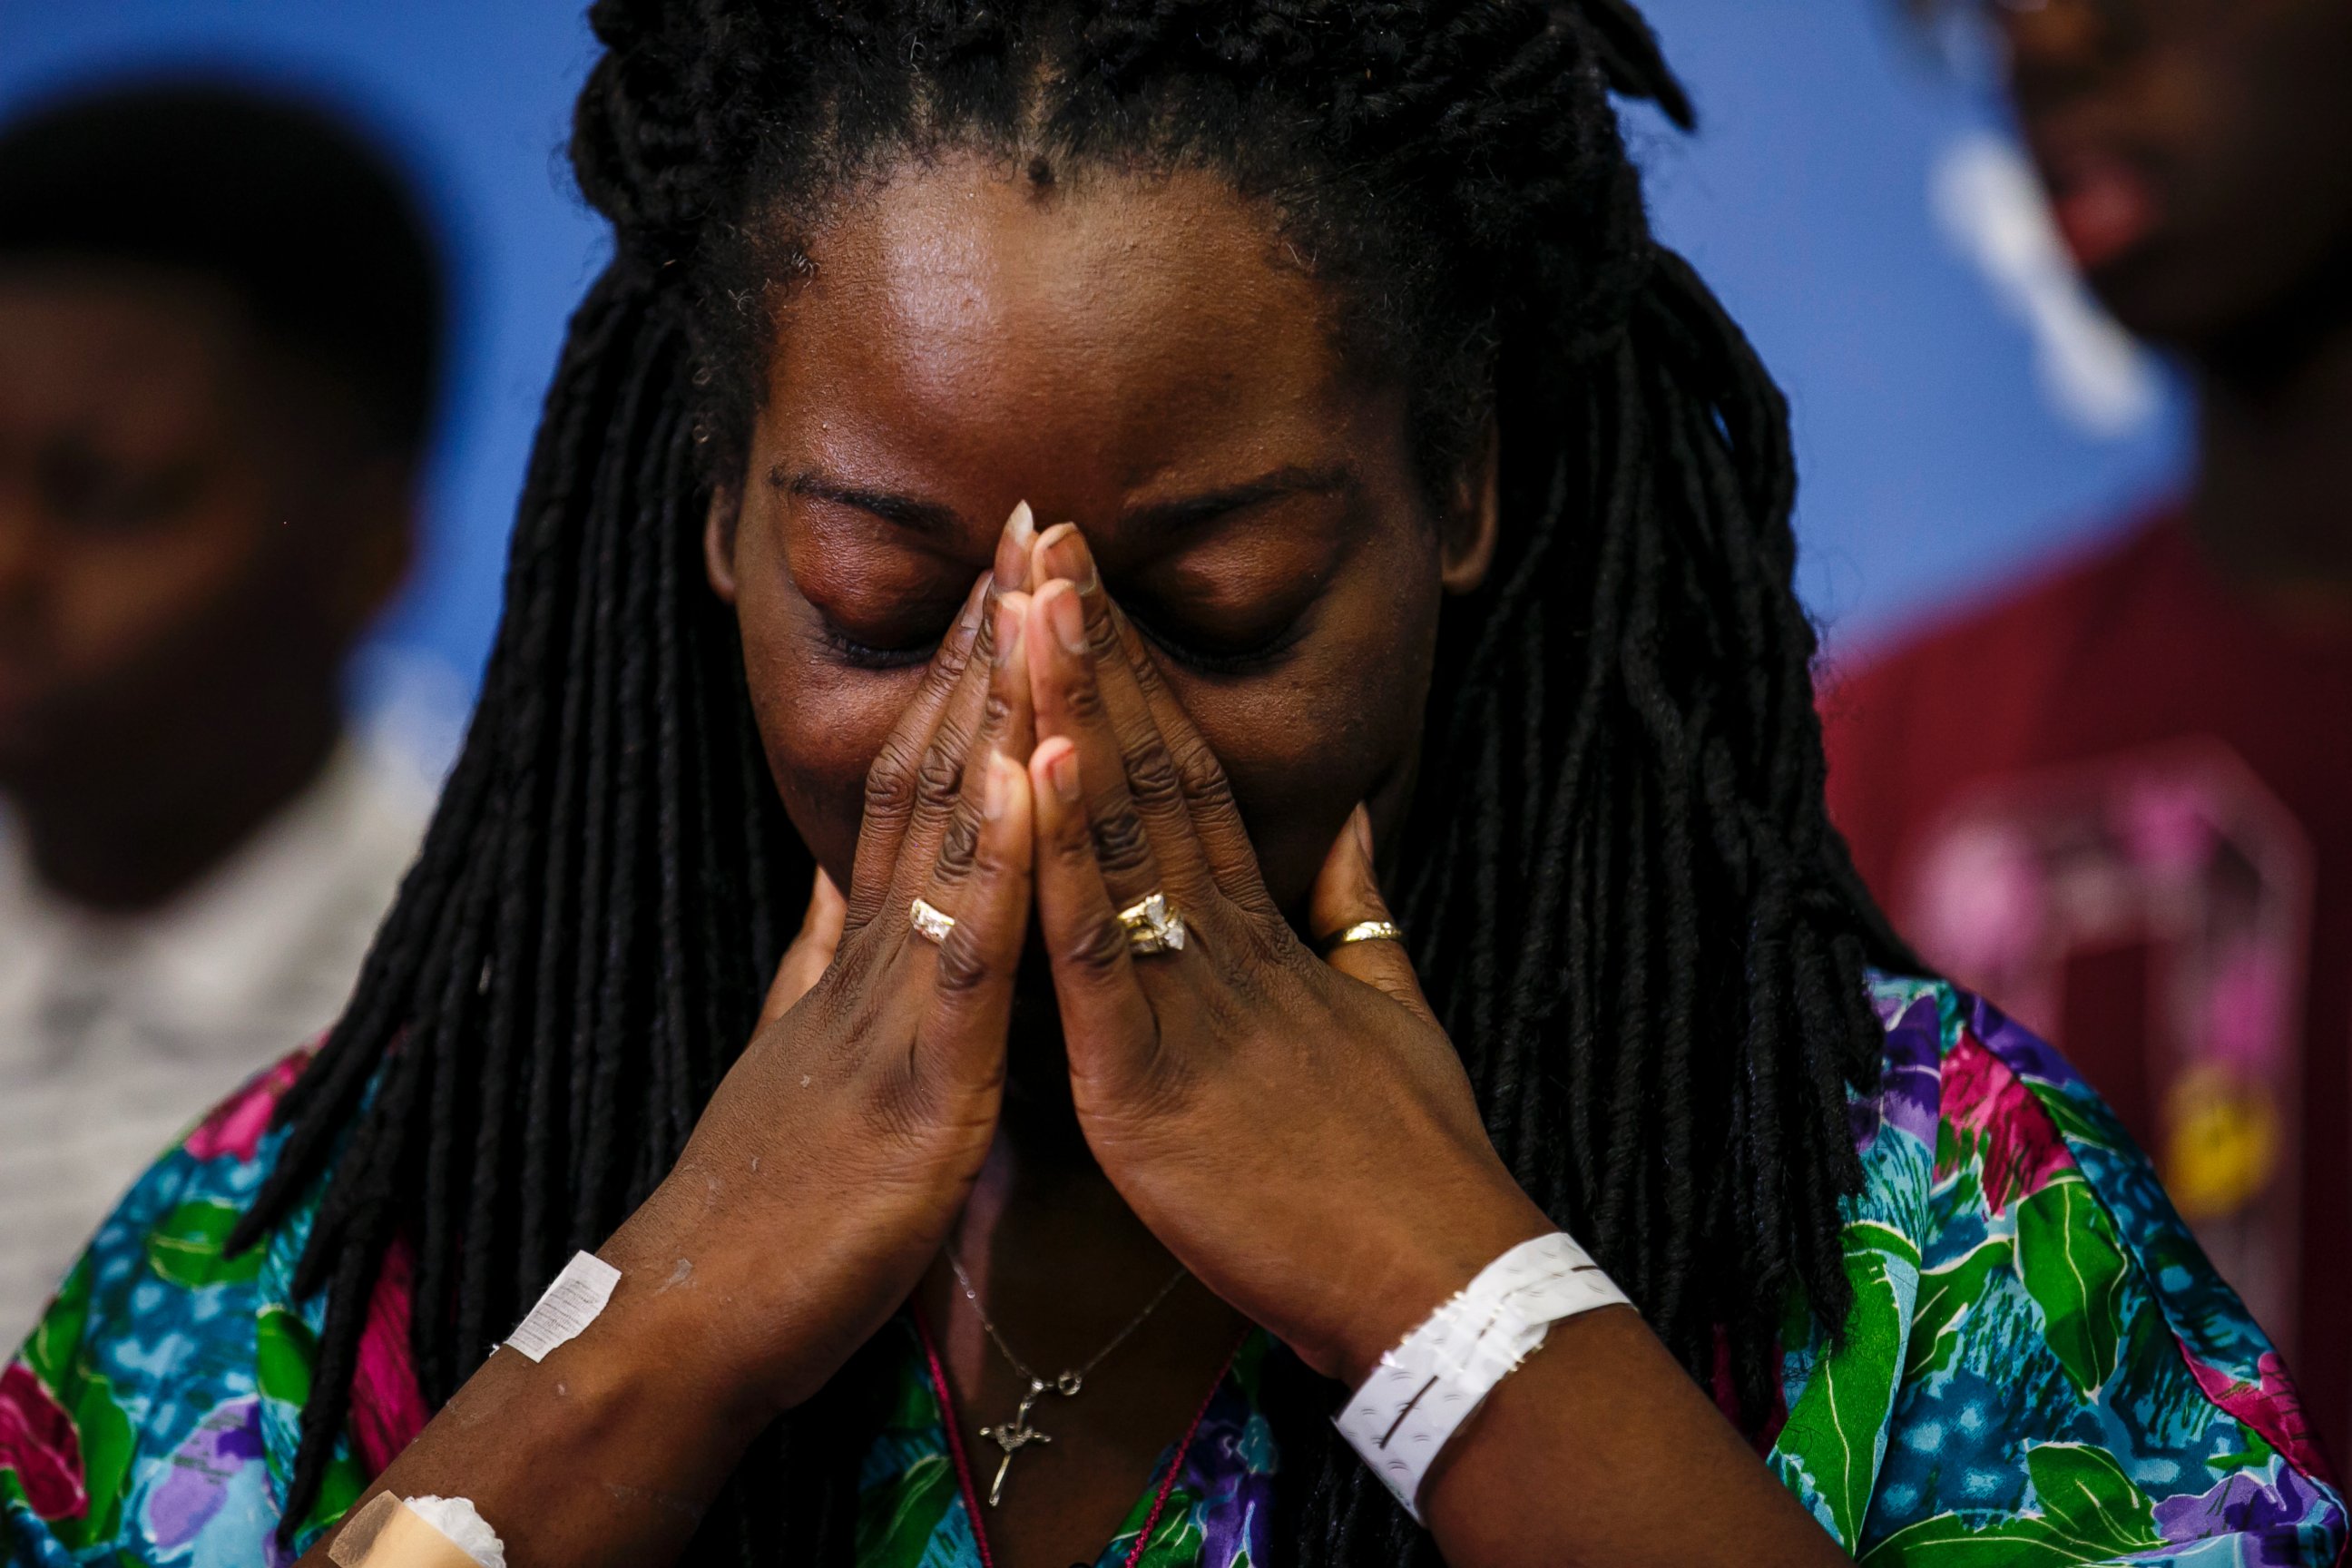 PHOTO: Shetamia Taylor gets emotional as her sons tell reporters of their account of the deadly night when a gunman attacked and killed 5 police officers and wounding 7 others, including Taylor, during a press conference in Dallas, Texas,  July 10, 2016. 